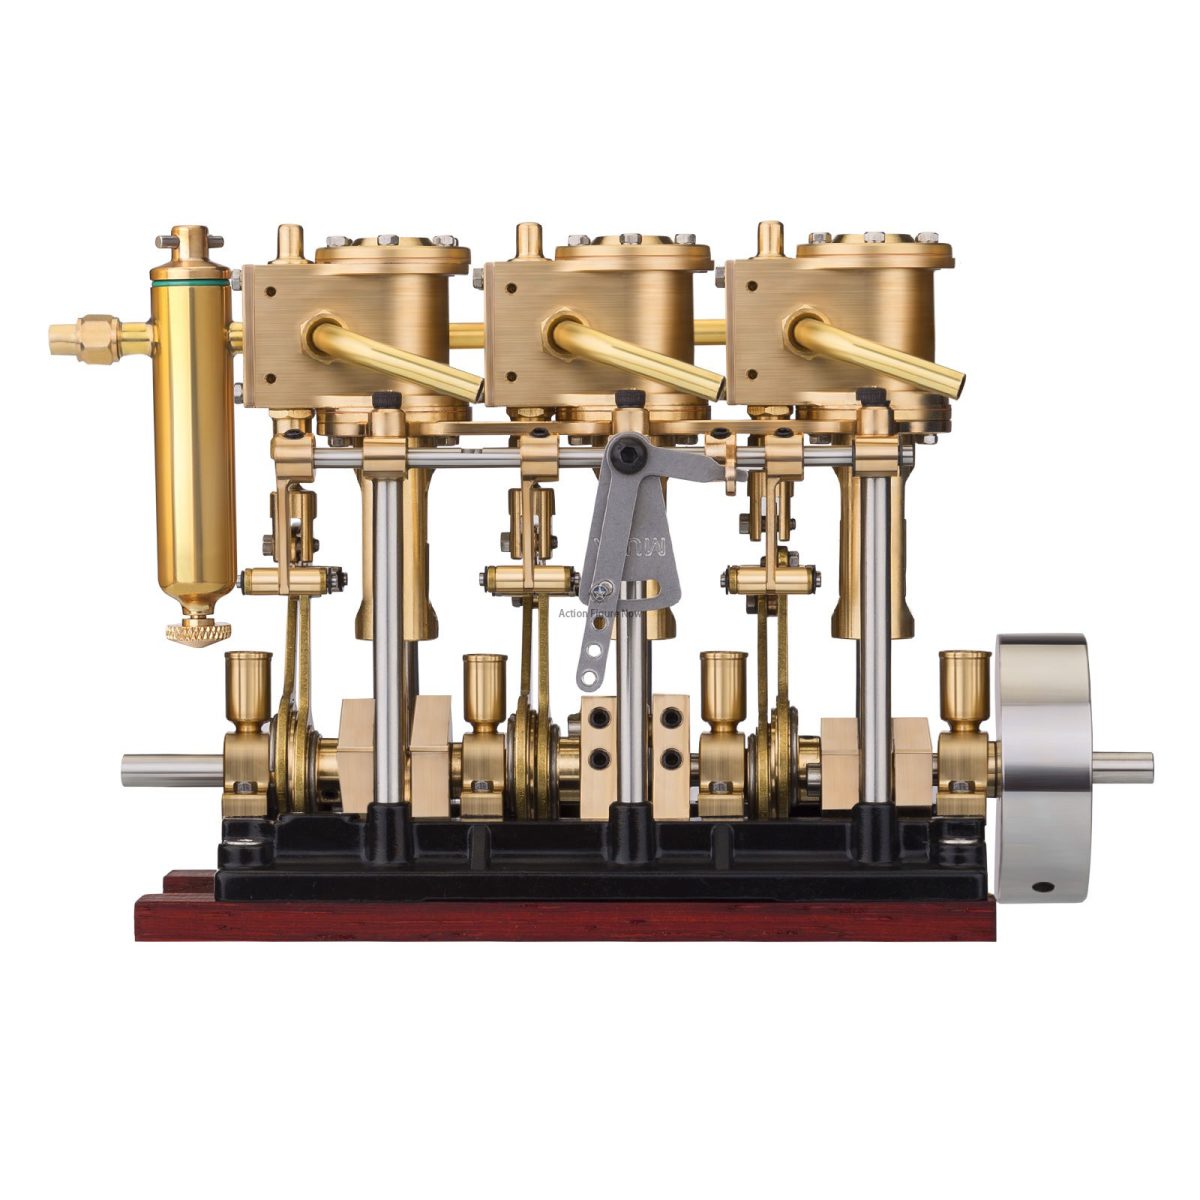 KACIO LS3-13S Three-Cylinder Steam Engine Model with Oil Cup and Forward/Reverse Rotation Capability